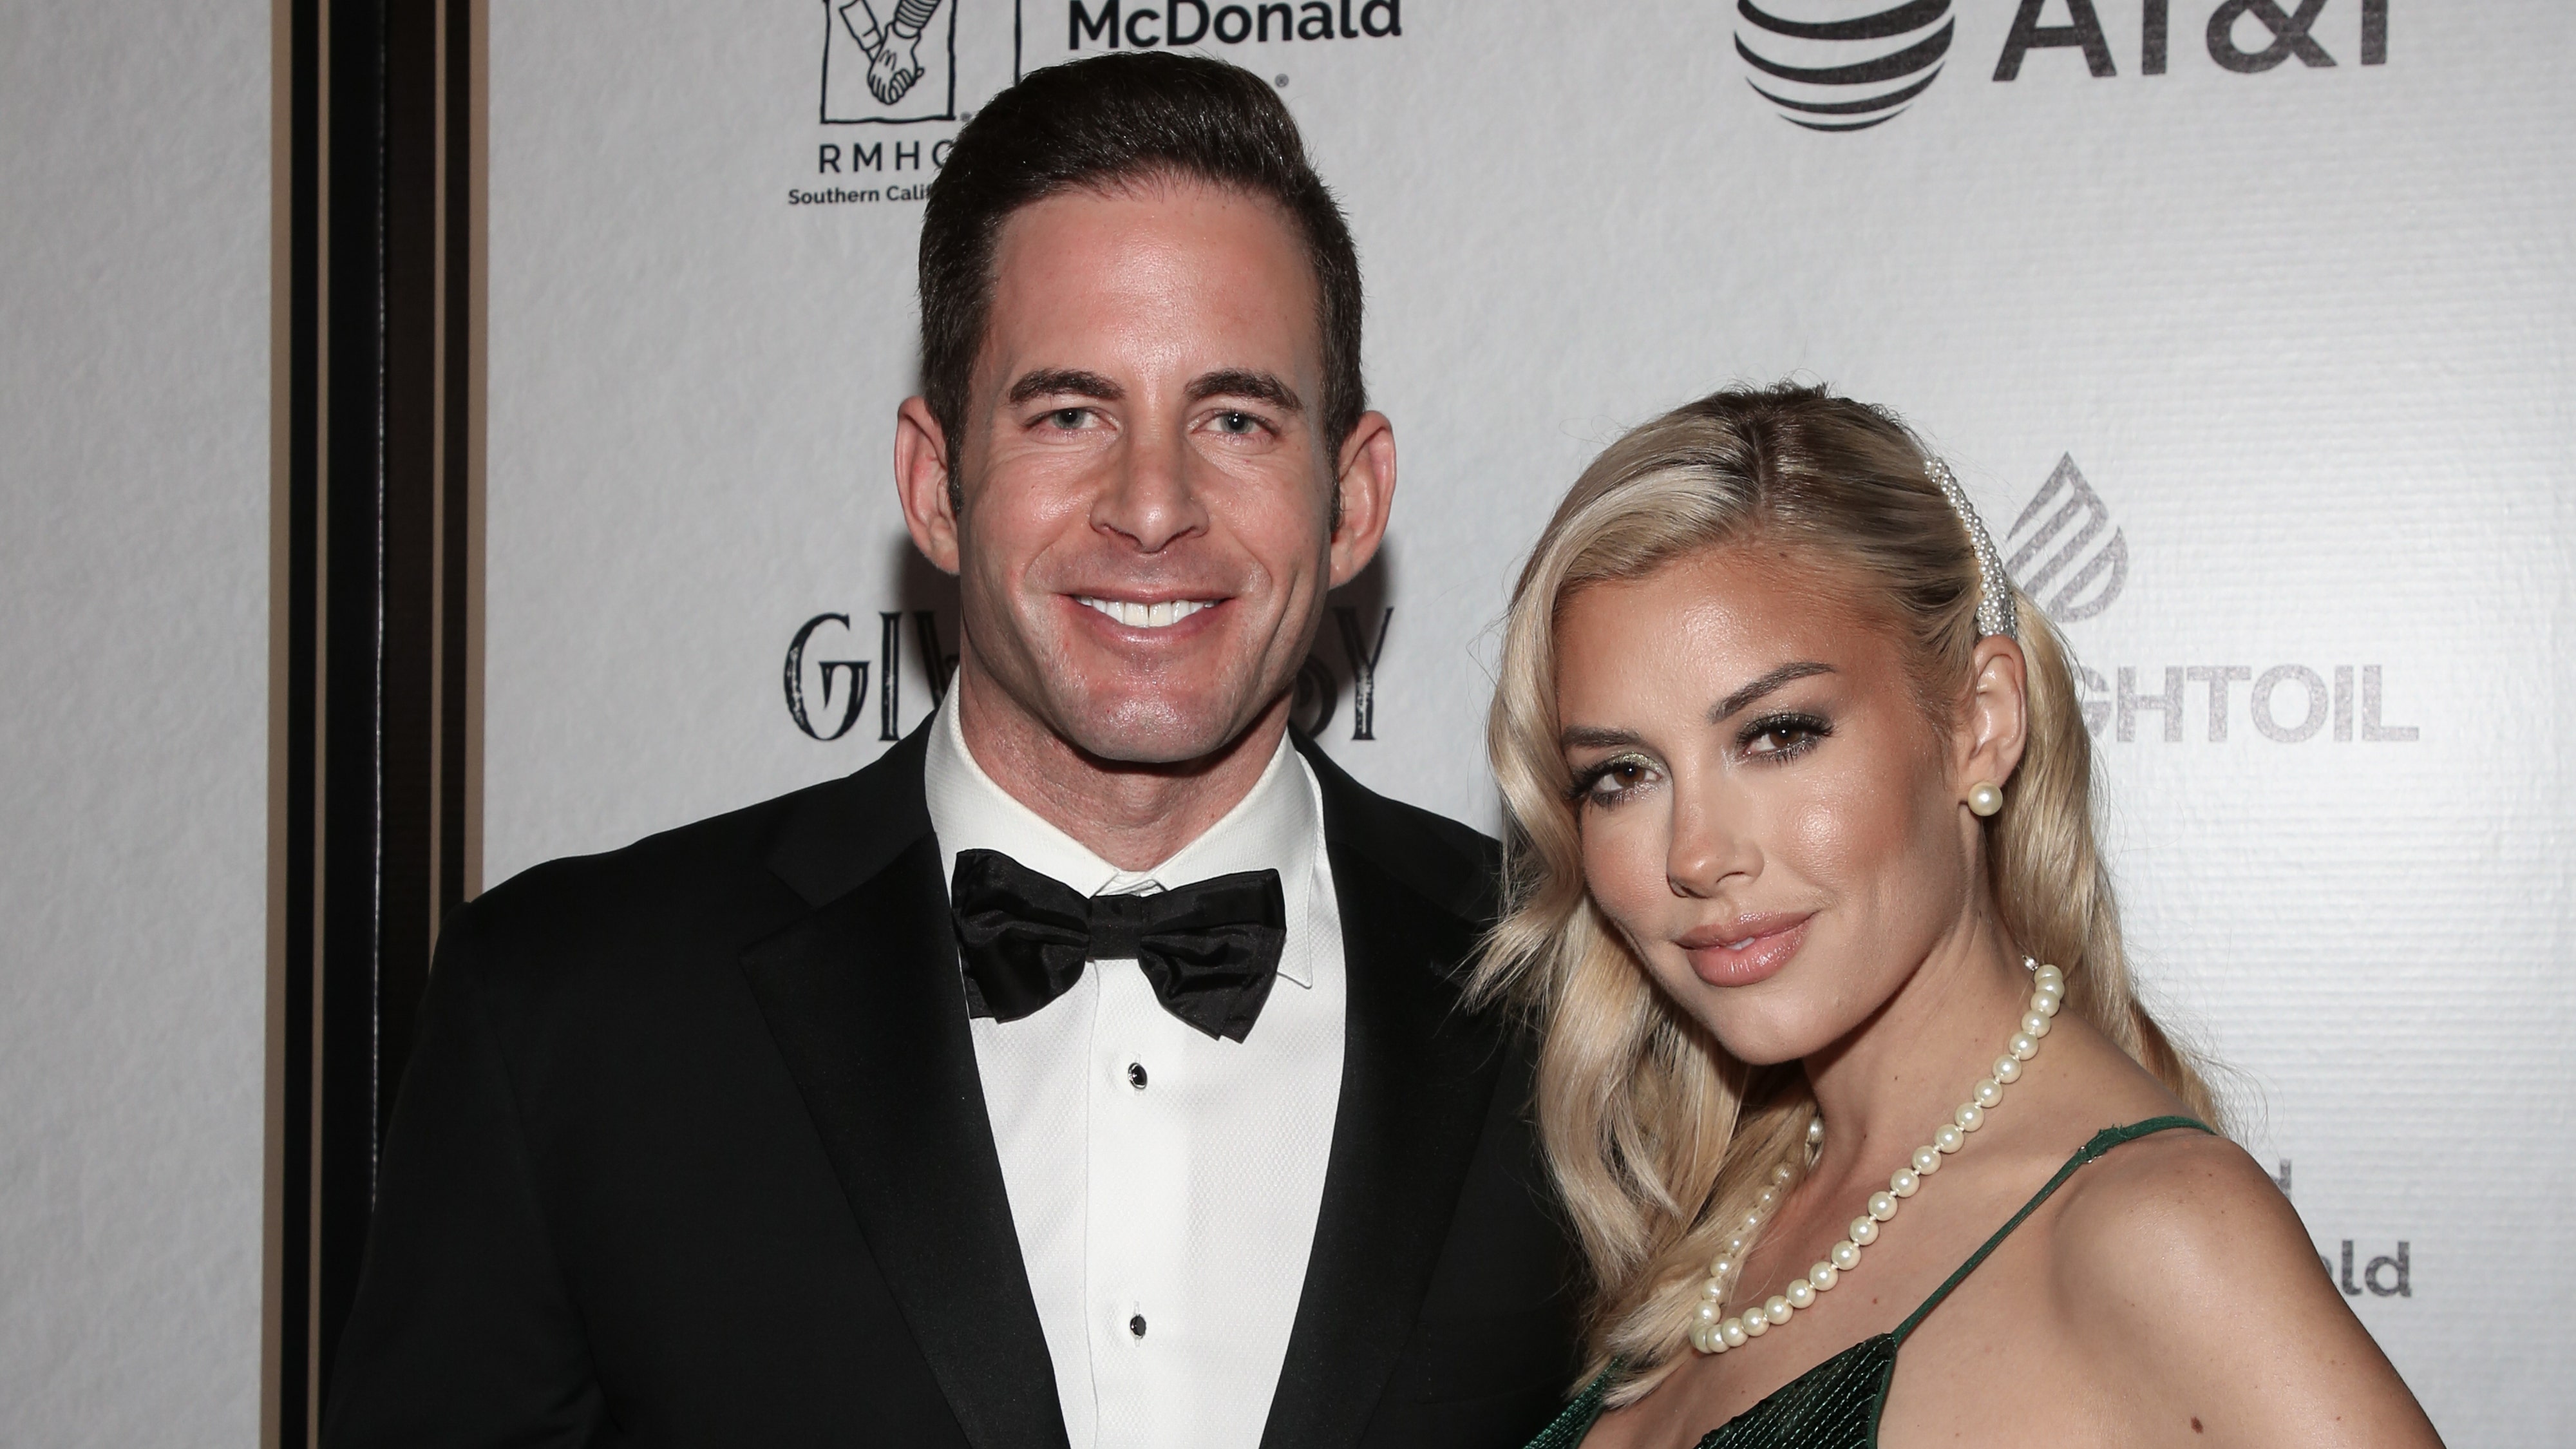 Tarek El Moussa and Heather Rae Young celebrate engagement with 'intimate' party